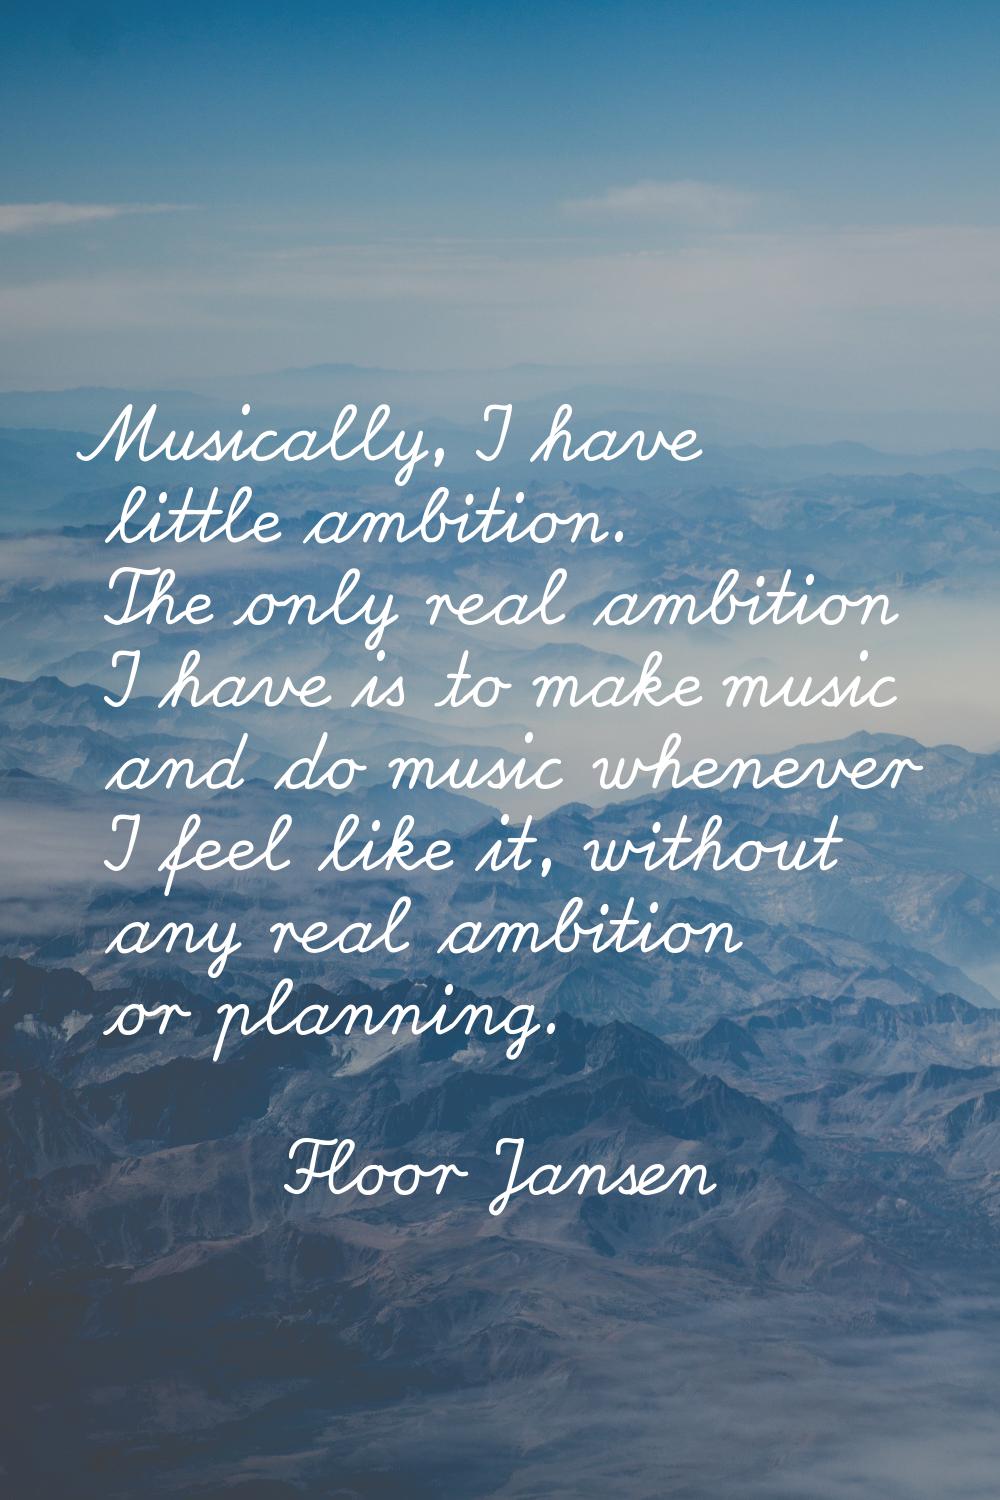 Musically, I have little ambition. The only real ambition I have is to make music and do music when